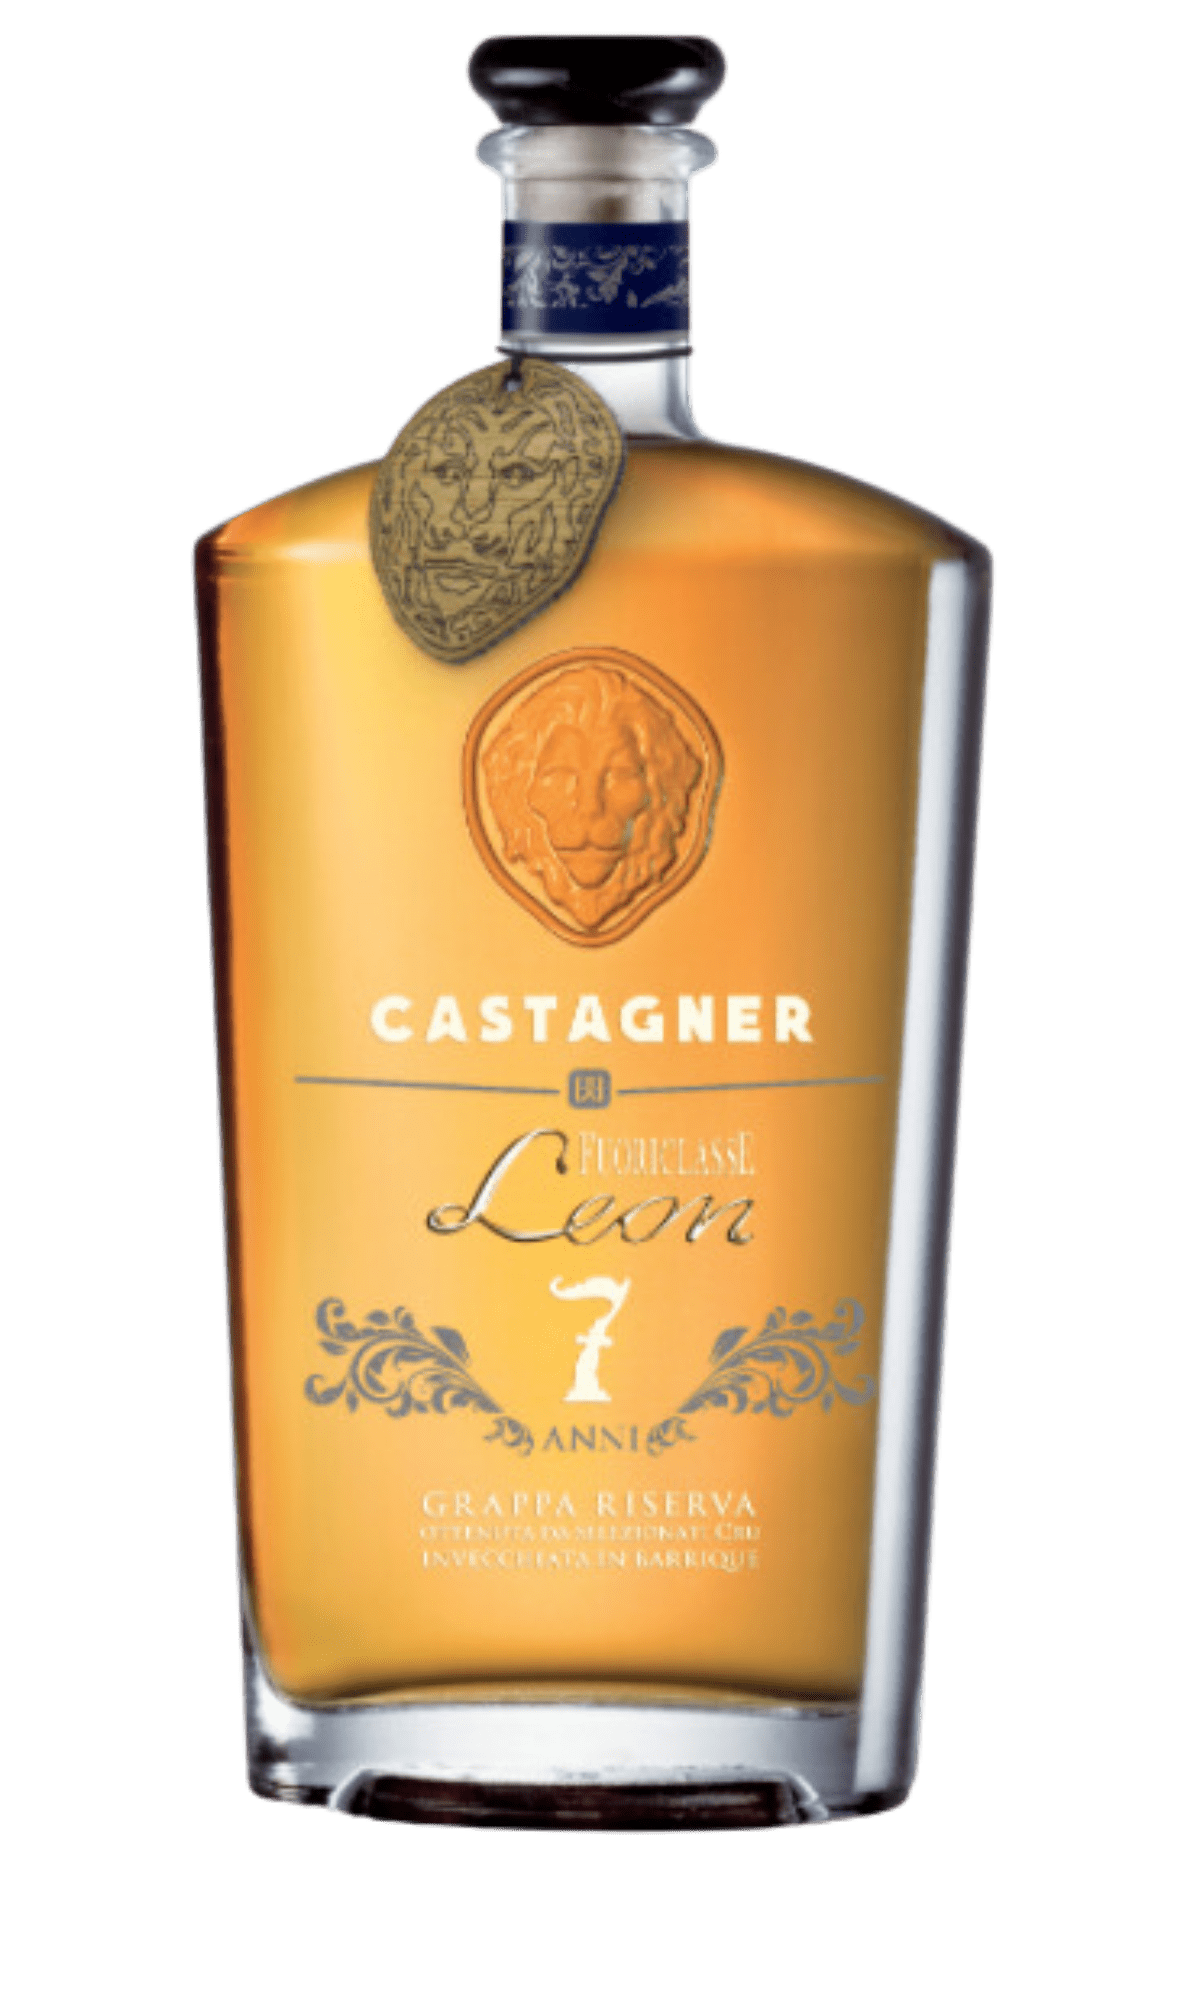 Fuoriclasse Leon Grappa Riserva 7 Years Old by Castagner